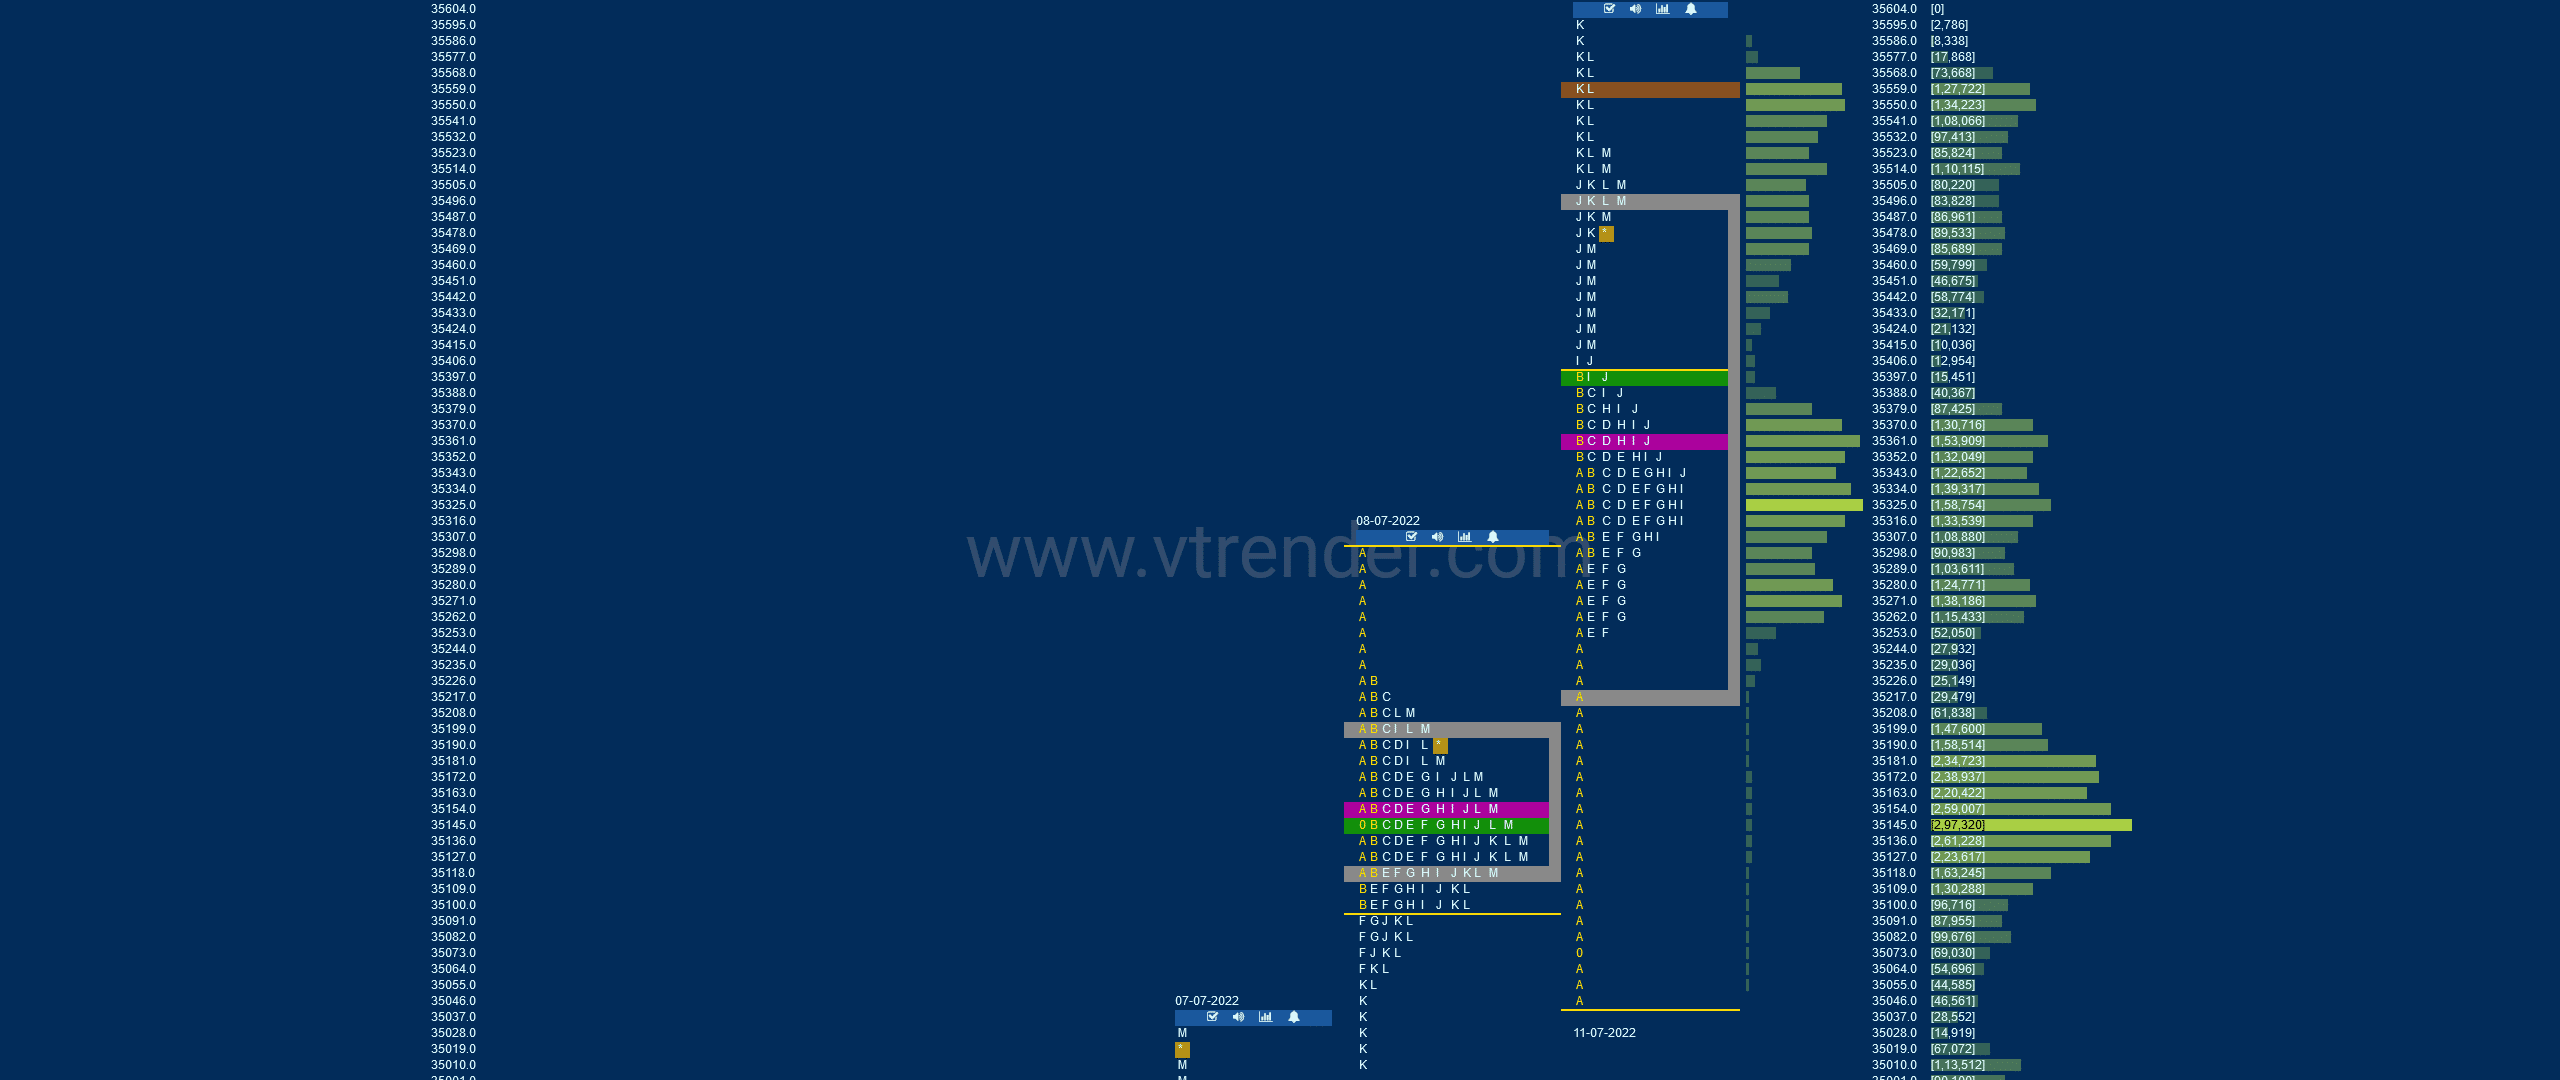 Bnf 7 Market Profile Analysis Dated 11Th Jul 2022 Banknifty Futures, Charts, Day Trading, Intraday Trading, Intraday Trading Strategies, Market Profile, Market Profile Trading Strategies, Nifty Futures, Order Flow Analysis, Support And Resistance, Technical Analysis, Trading Strategies, Volume Profile Trading